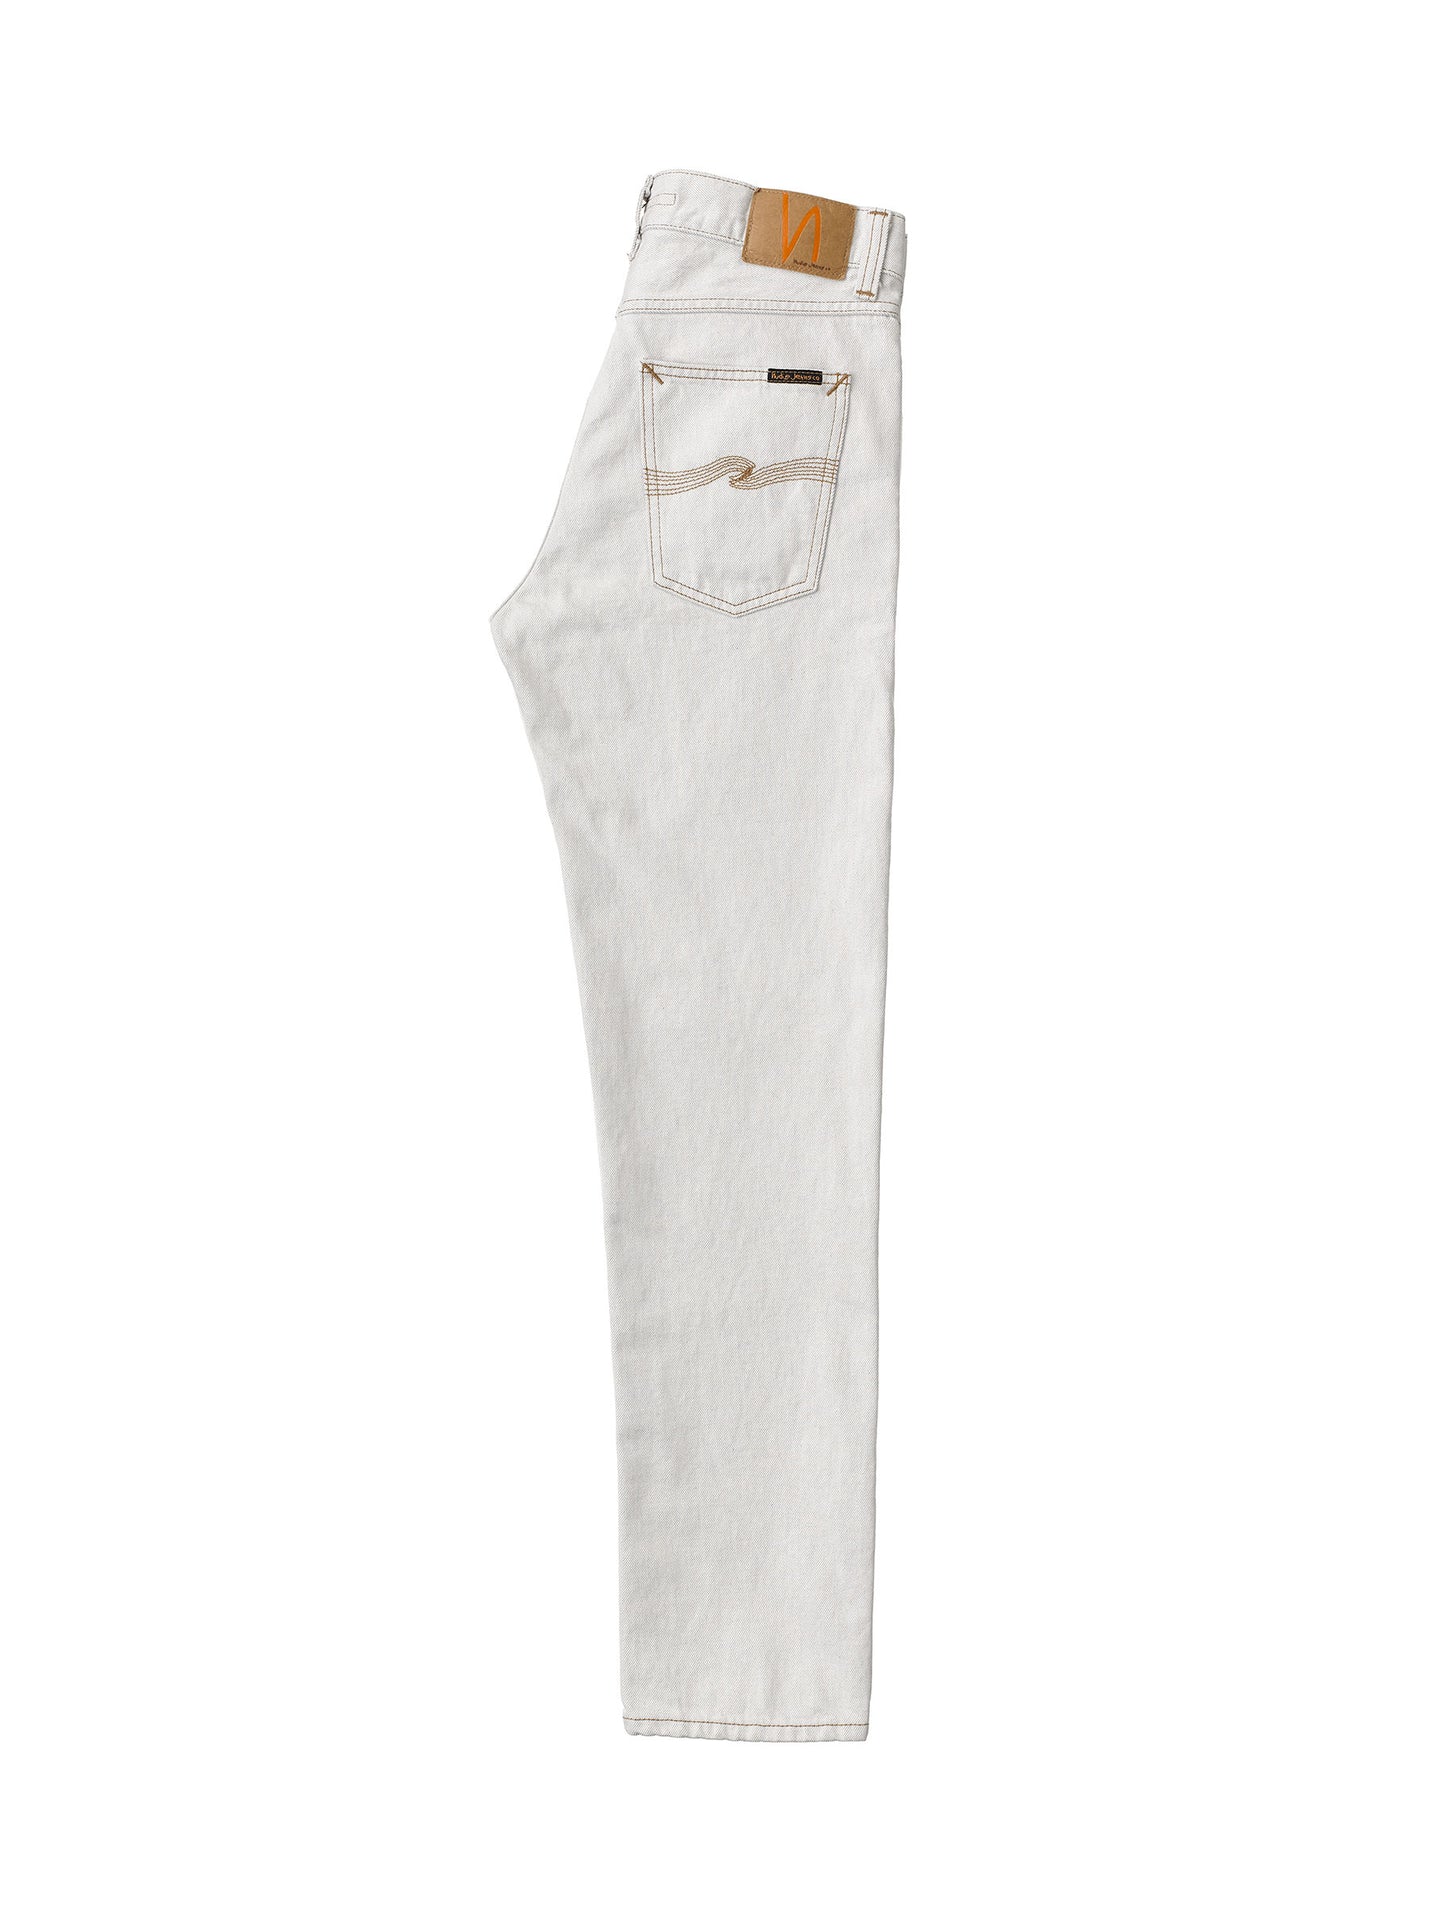 Nudie Jeans Gritty Jackson Jean L32 Clay White